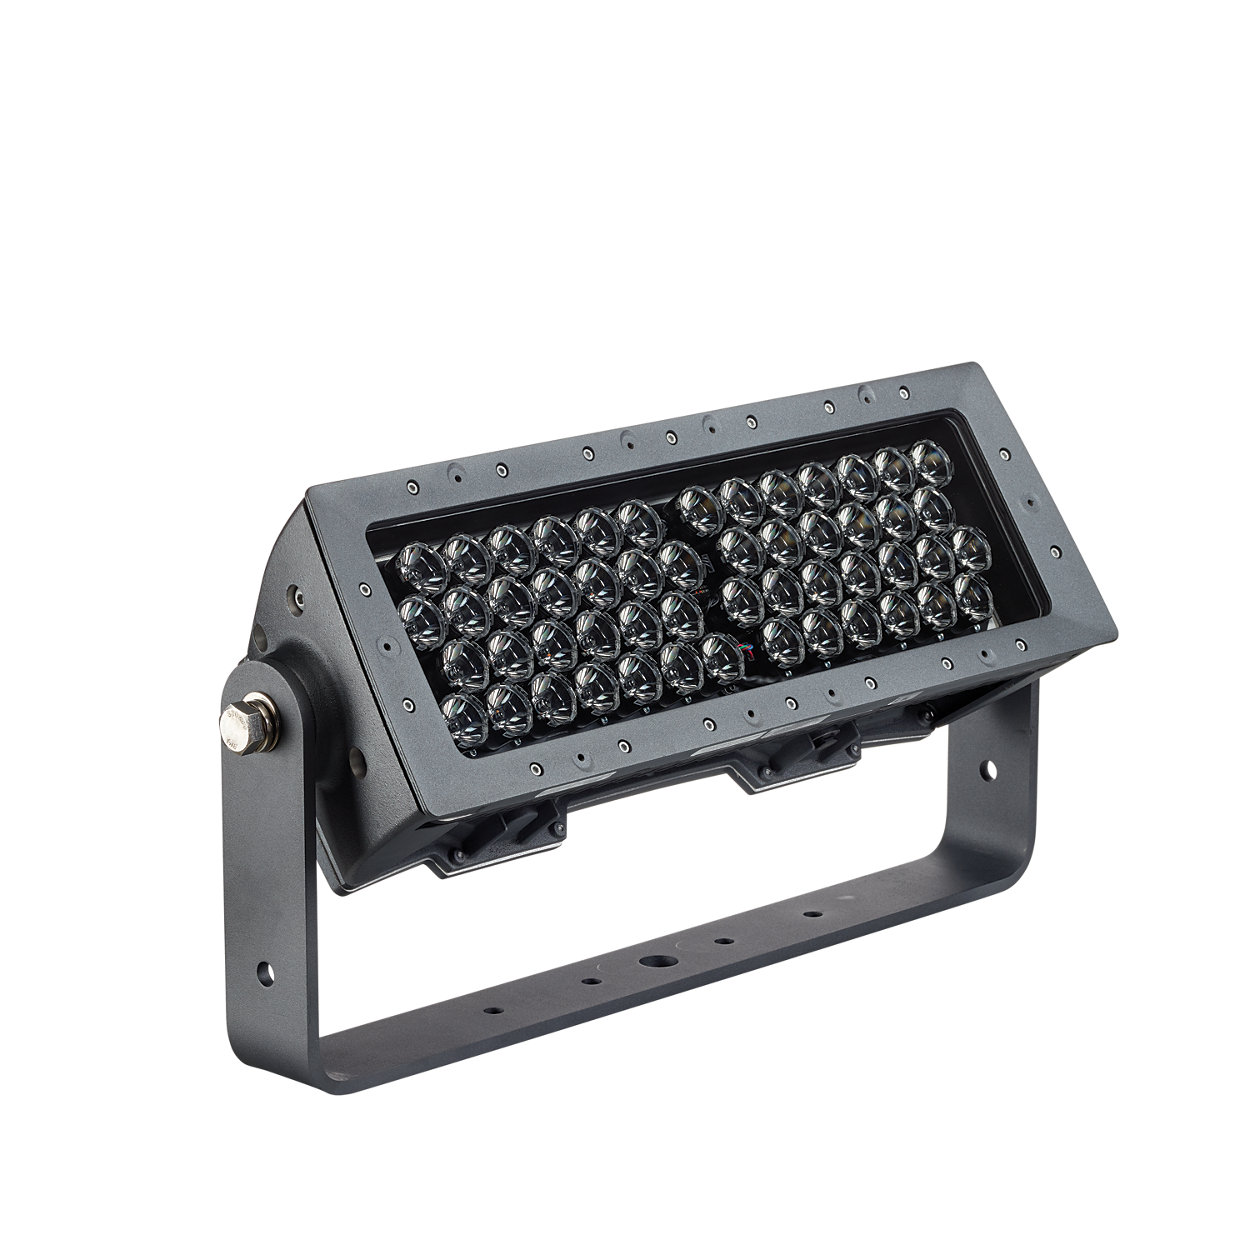 ColorReach Compact Powercore RGBW/RGBA - High-performance compact architectural floodlight